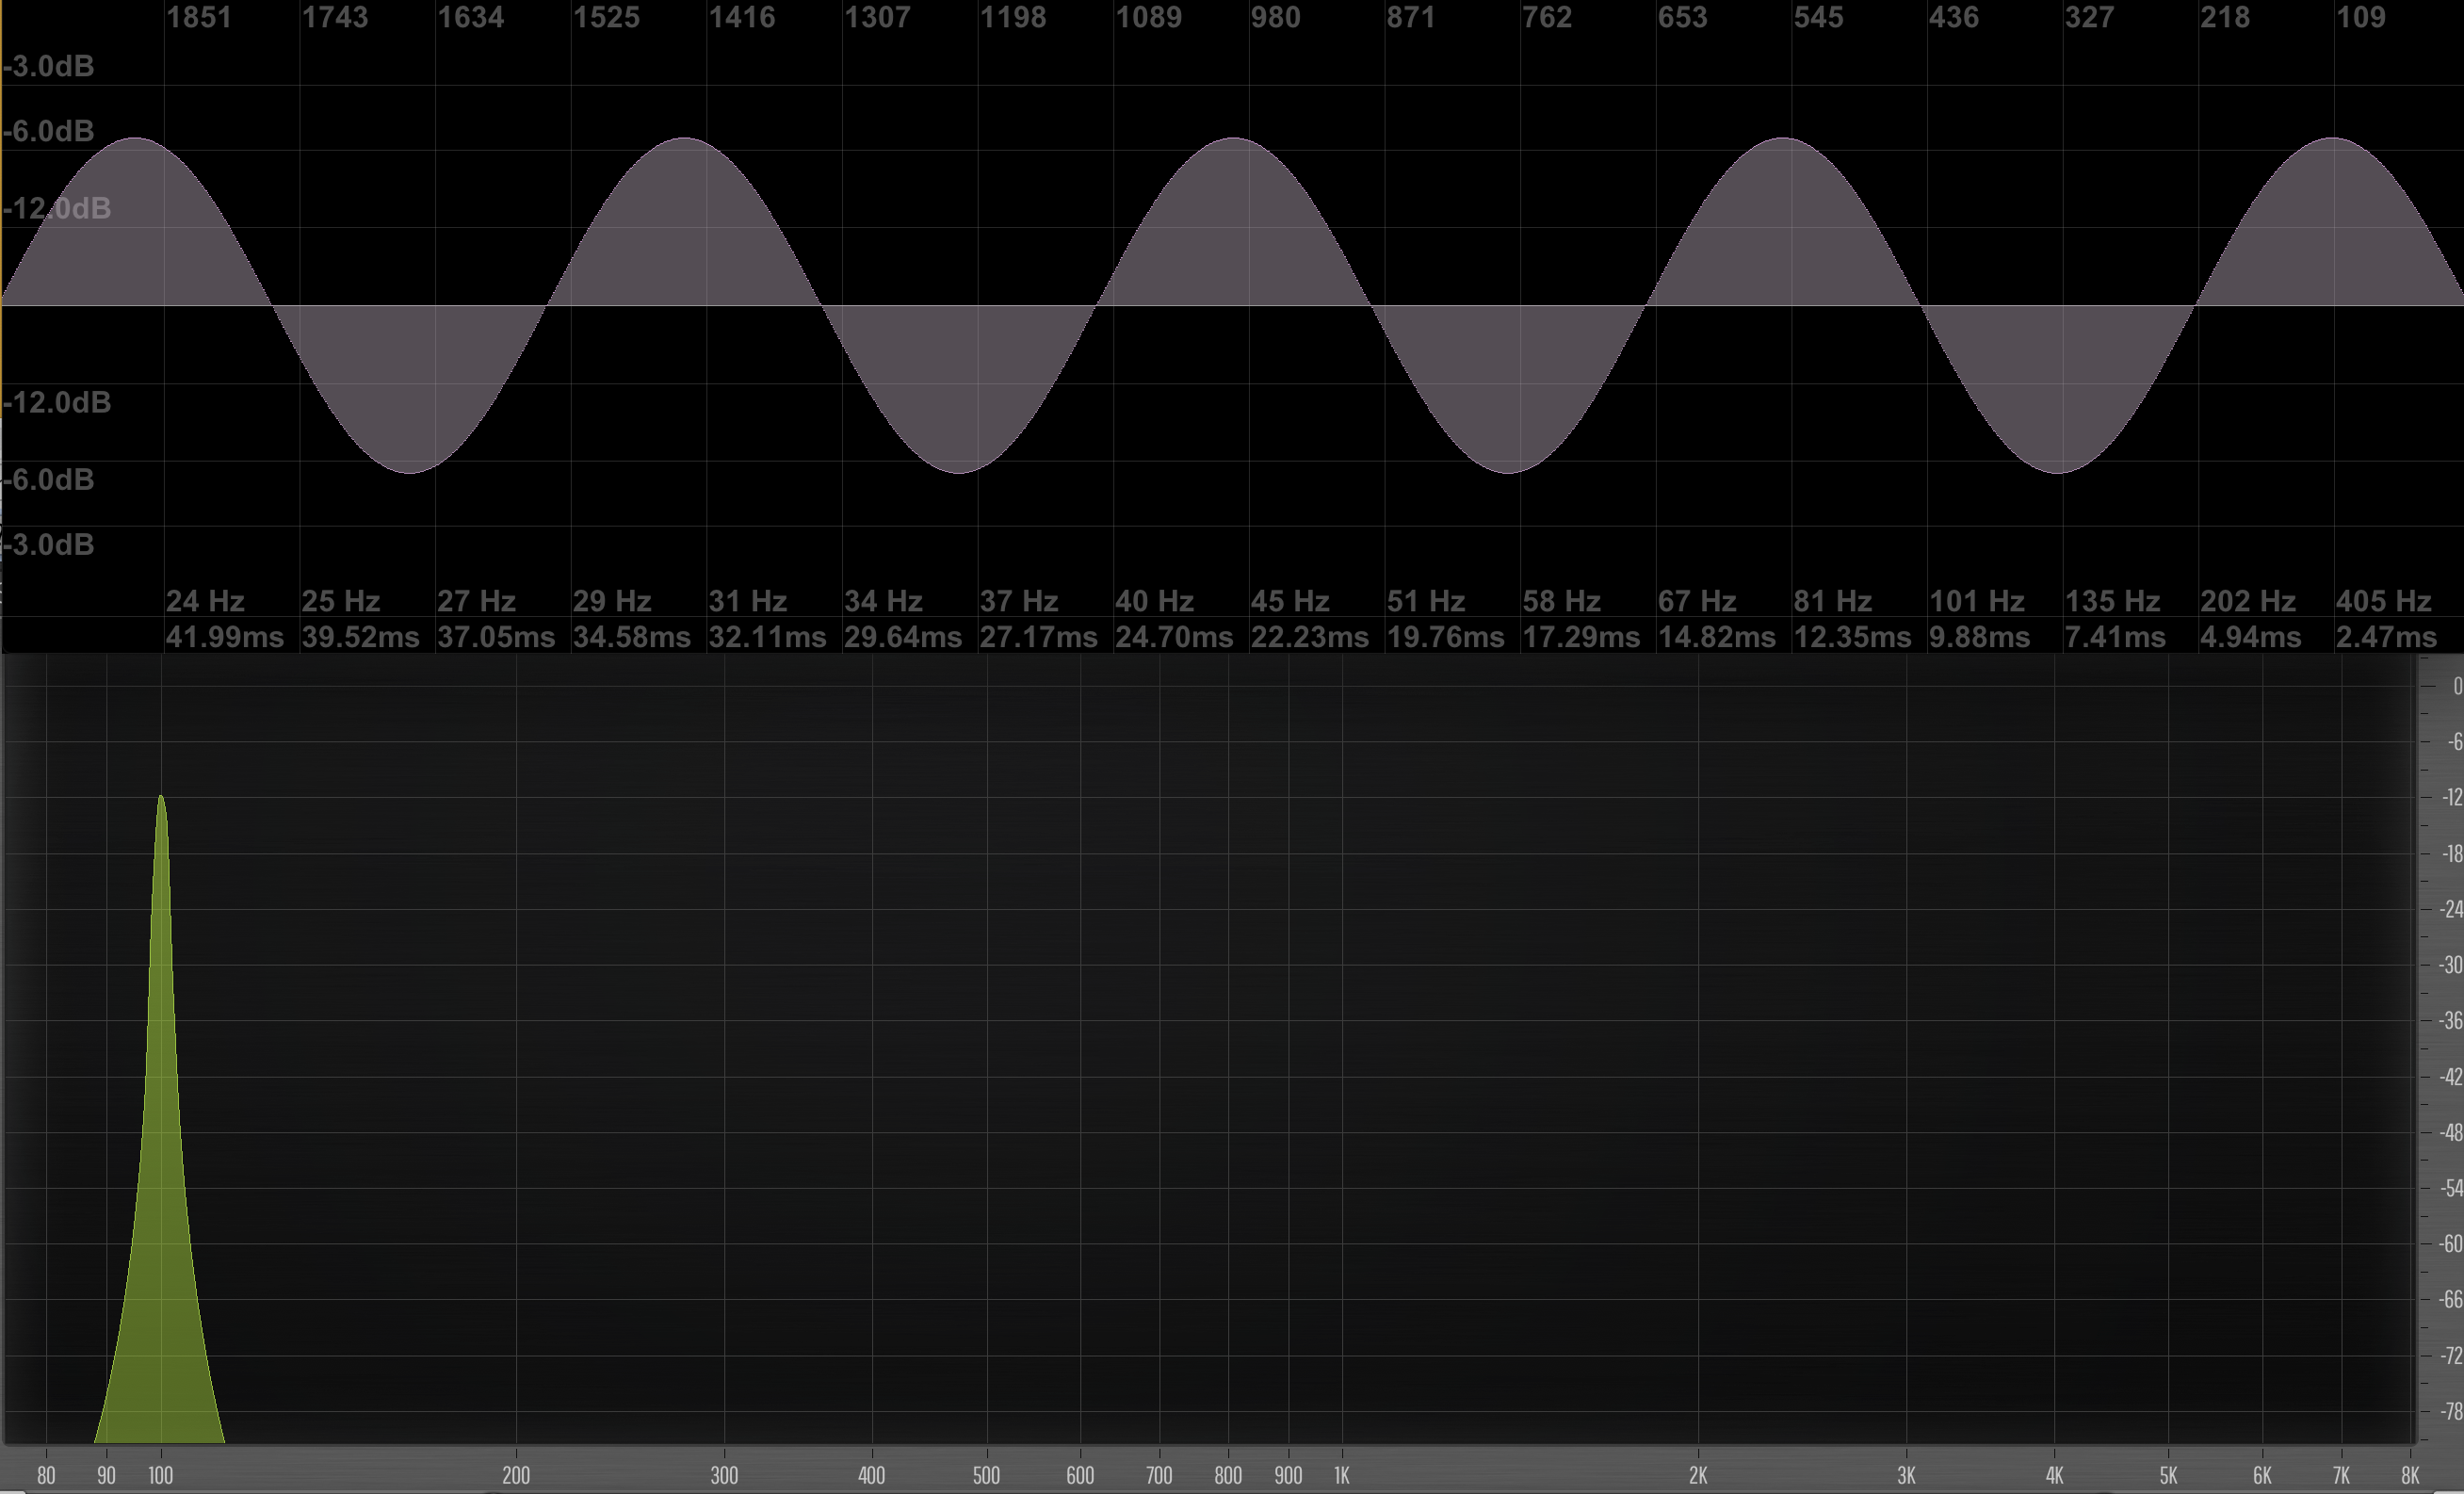 Demonstration of oscilloscope and frequency spectrum of a 100Hz sine wave signal.